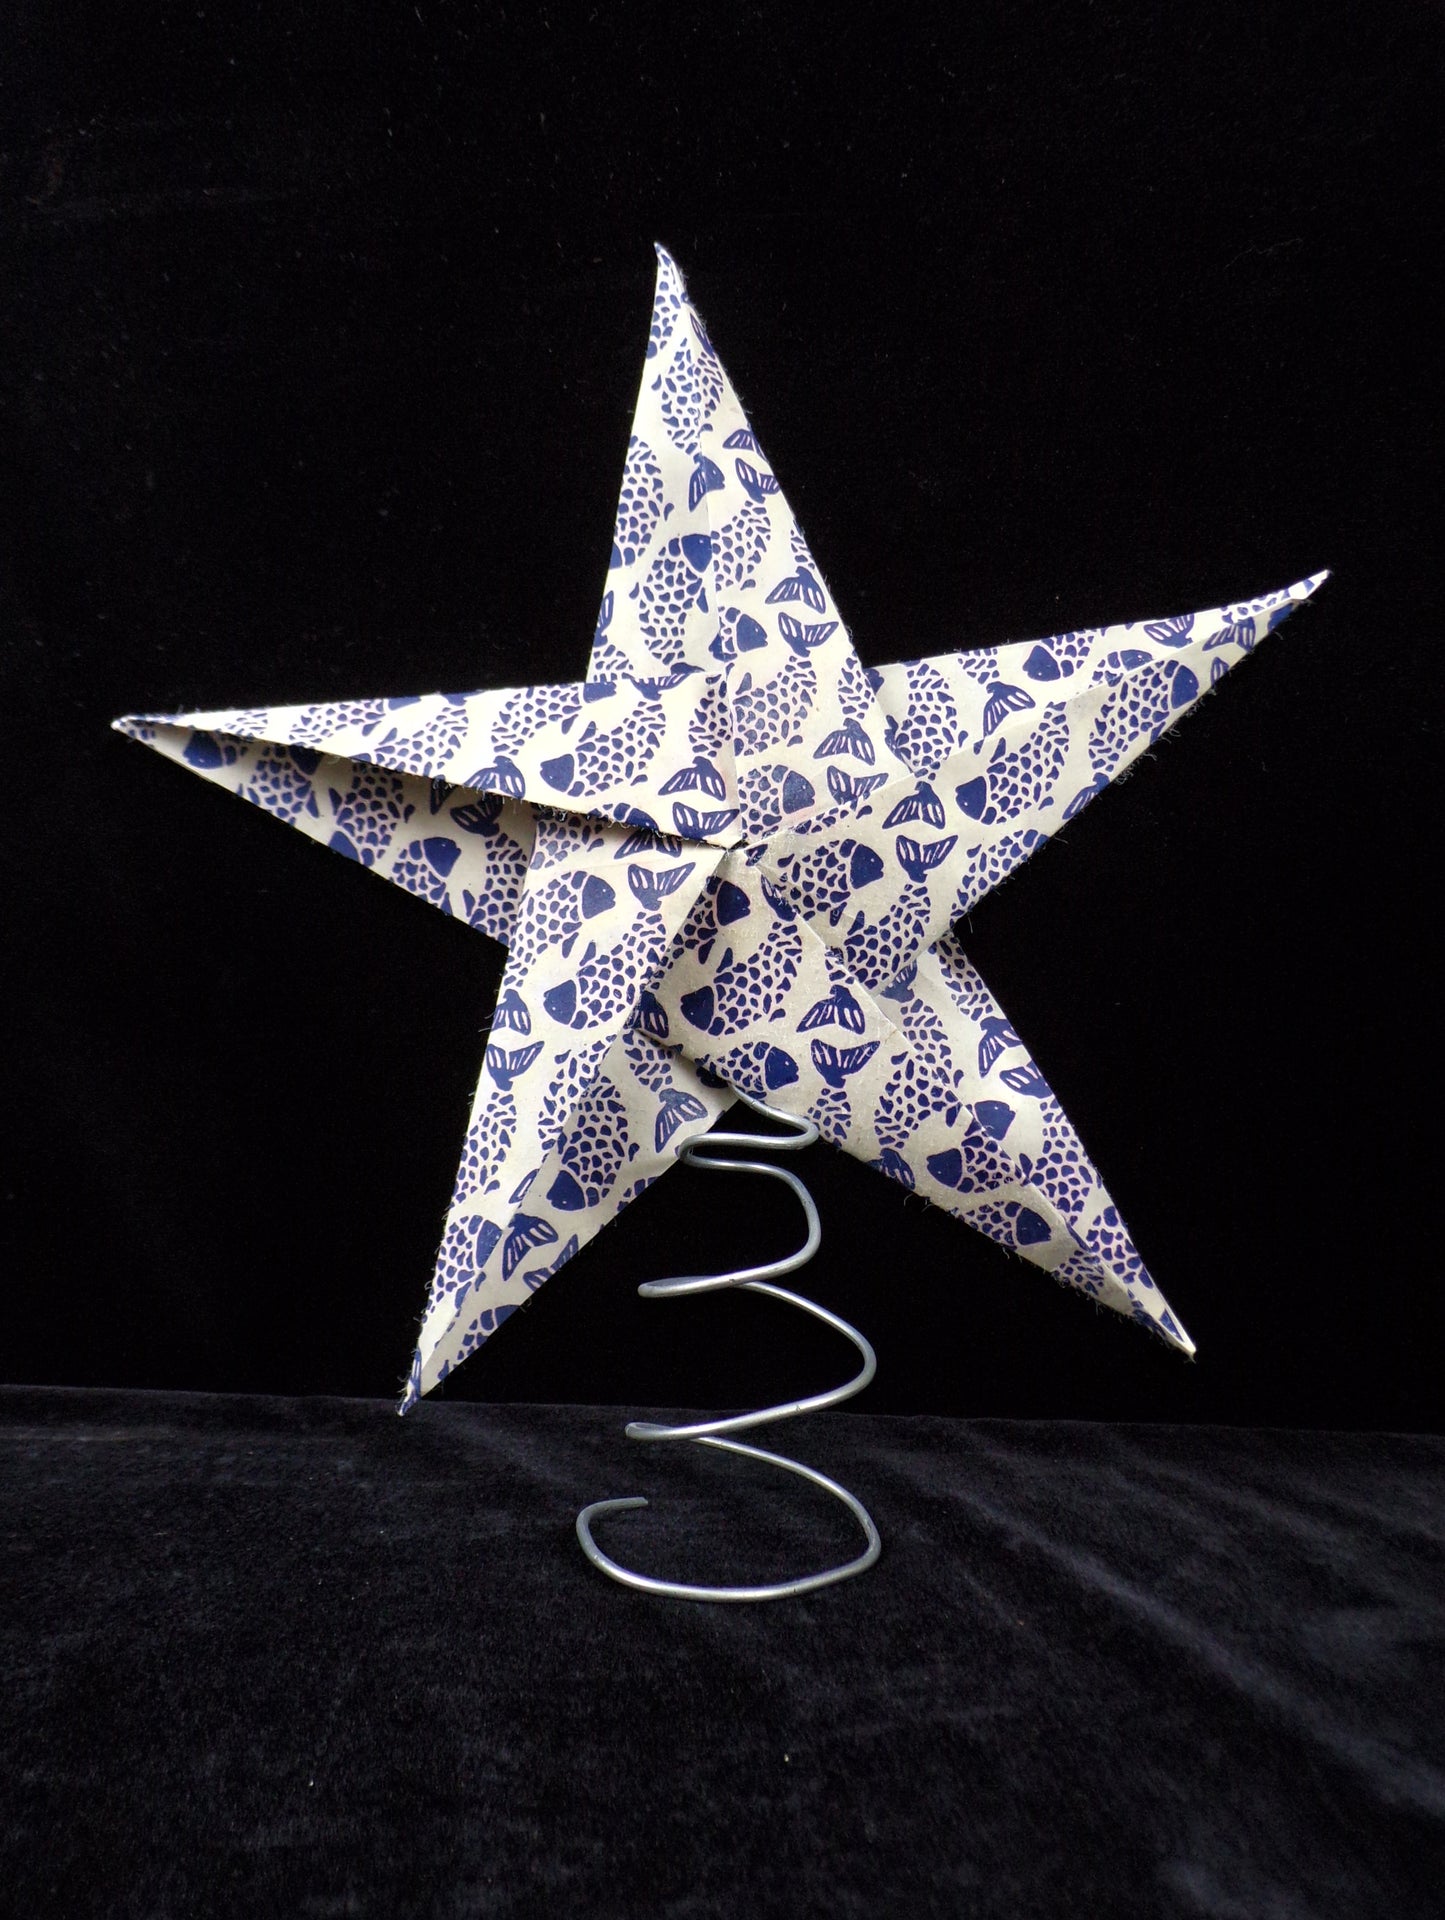 5-Pointed Origami Star Nautical Themed Papercraft